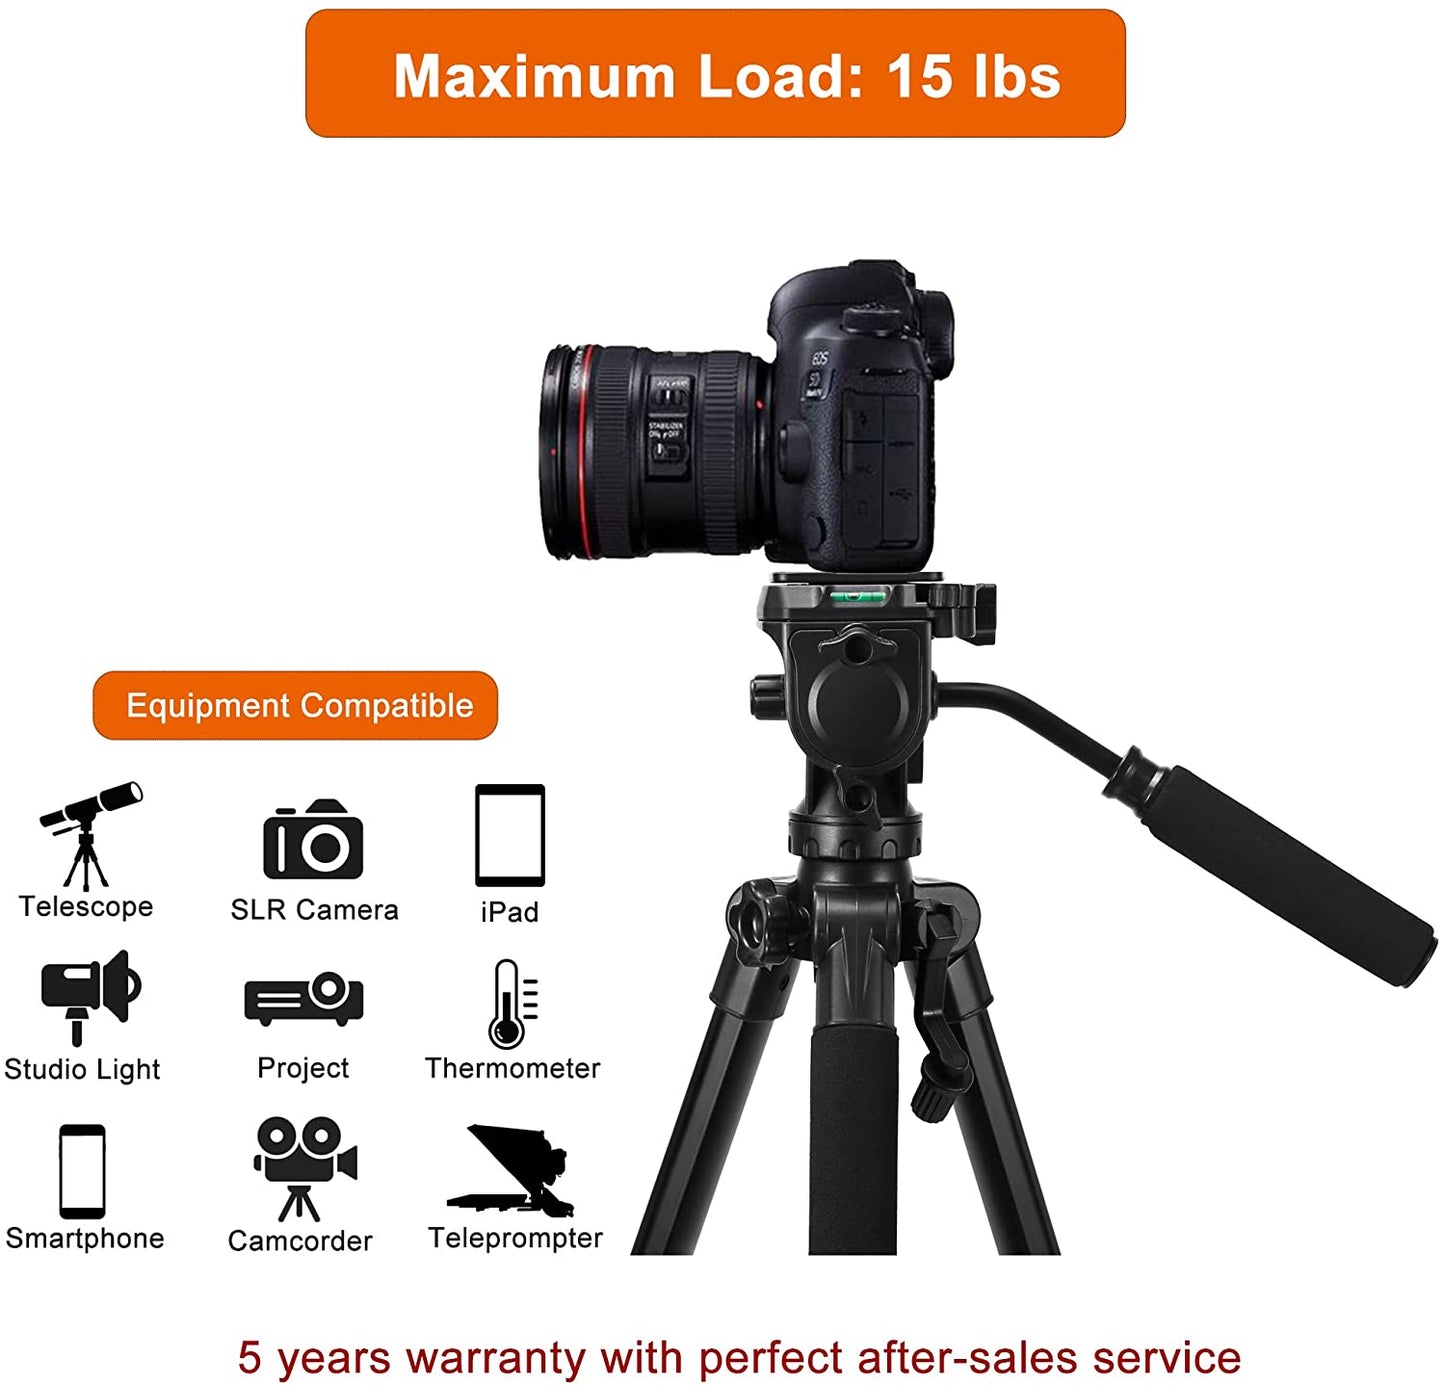 Tripod for Camera, 75 inch DSLR Tripod for Canon Nikon iPhone Smartphone iPad Tablet - Professional Video Tripod 15 lbs Loads with 2 Quick Release Mounts and Carry Case